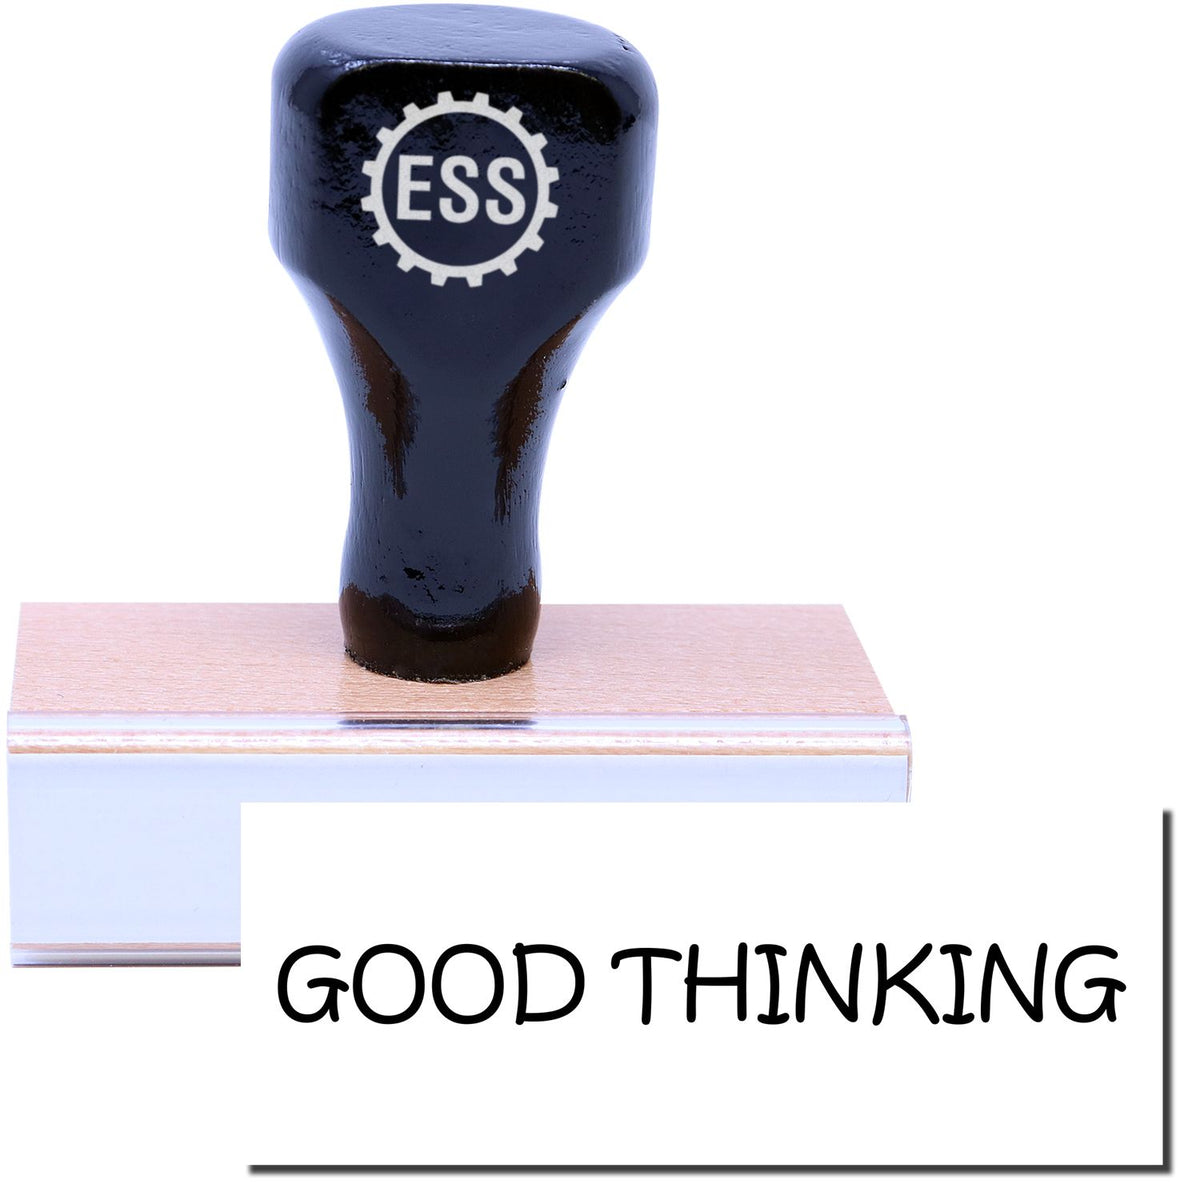 A stock office rubber stamp with a stamped image showing how the text &quot;GOOD THINKING&quot; is displayed after stamping.